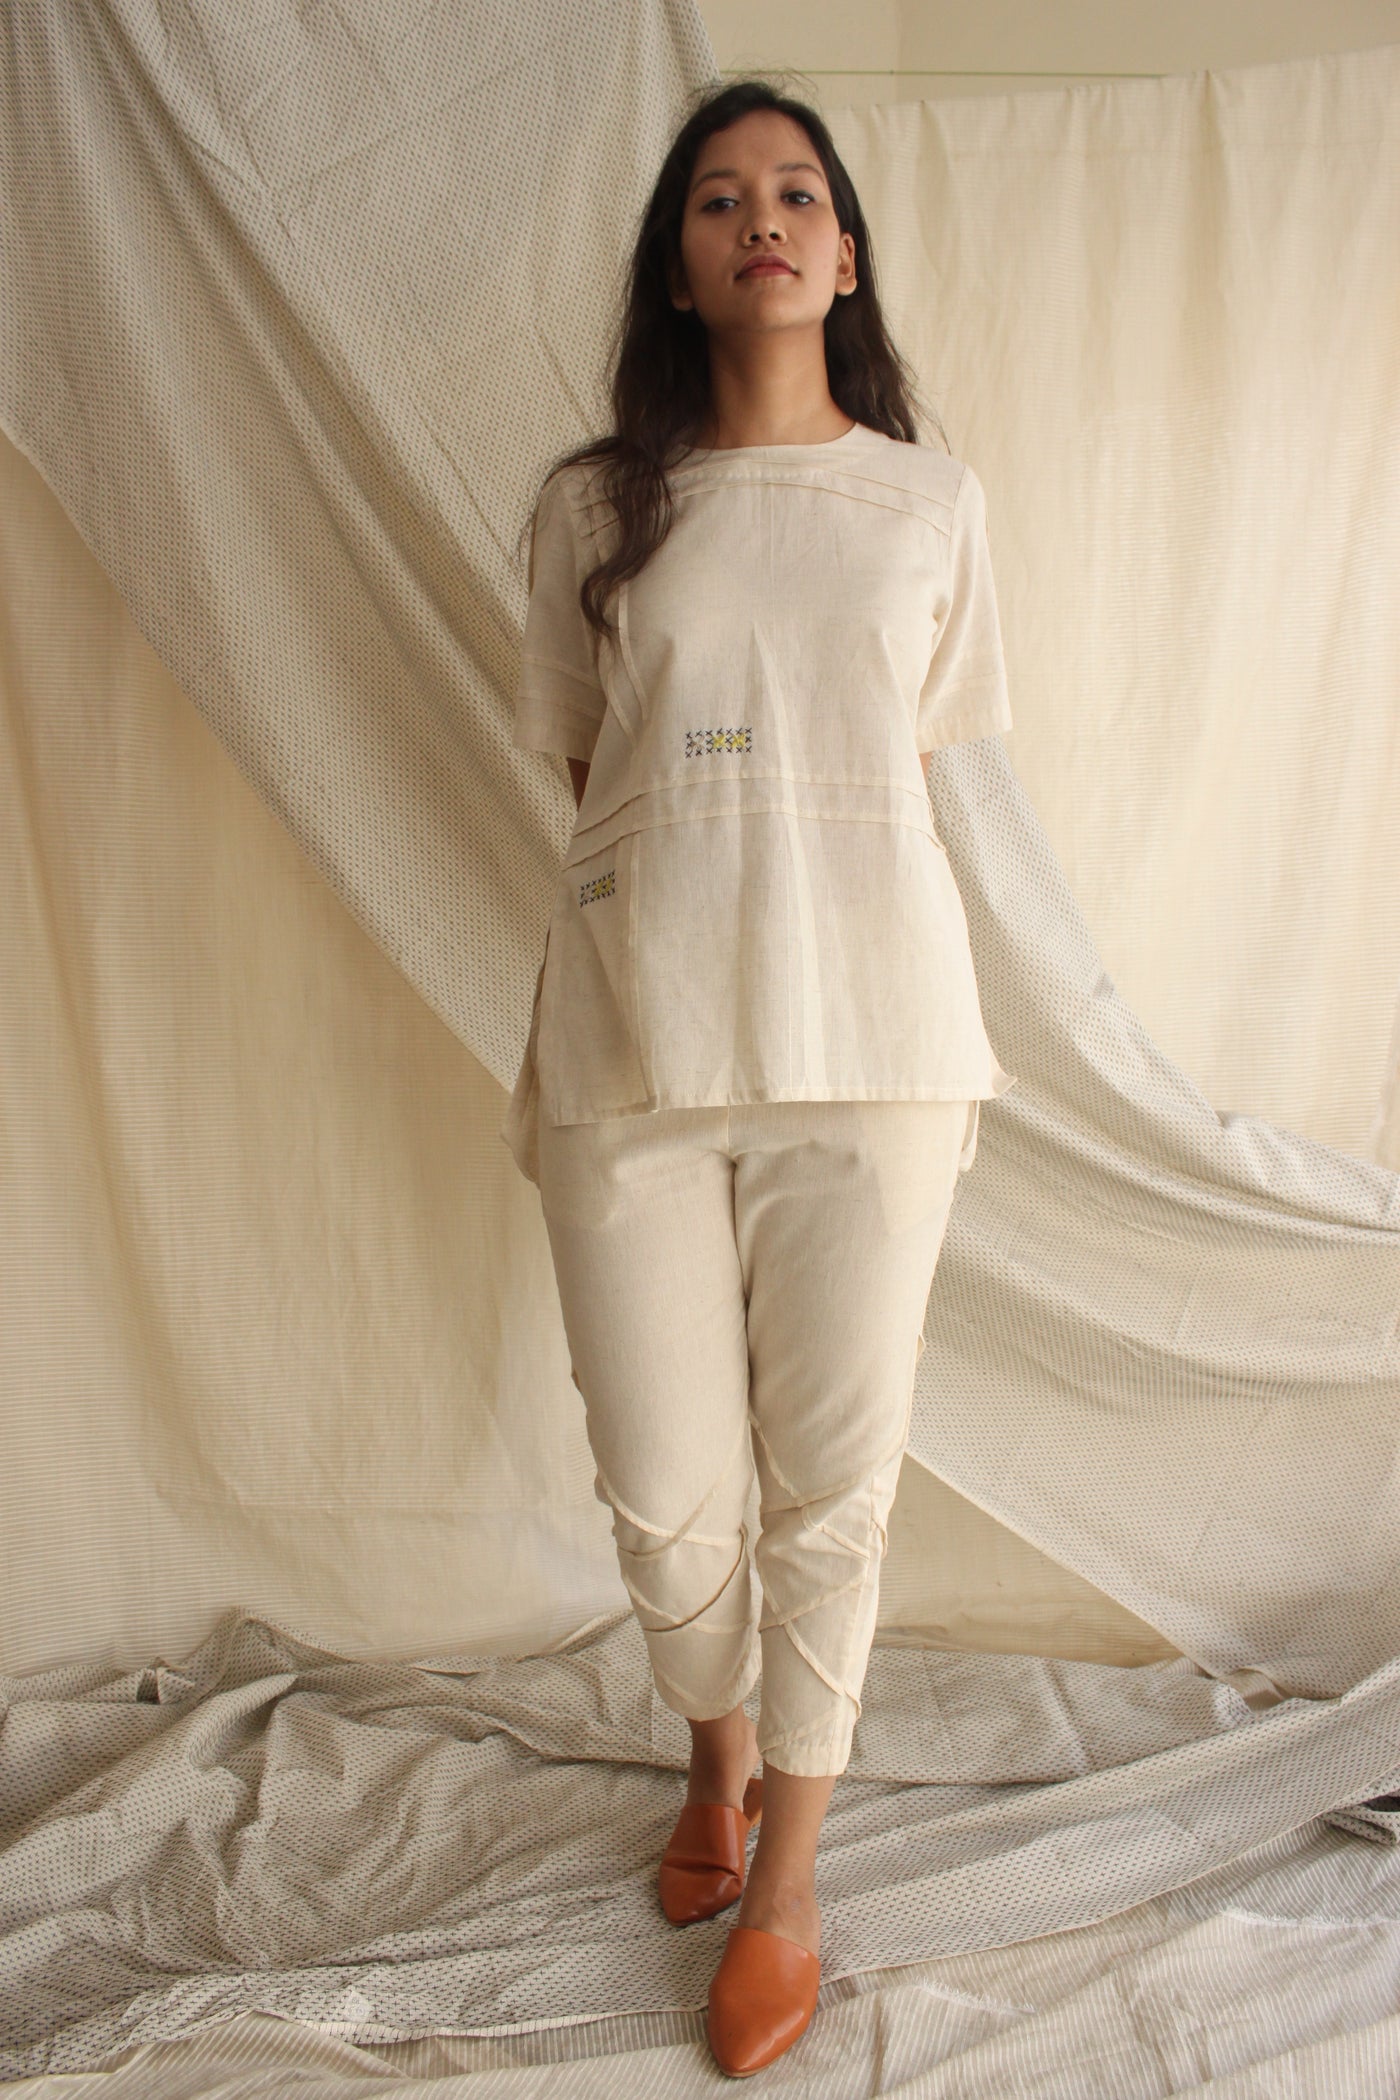 Boxy fit white top with full length white pants